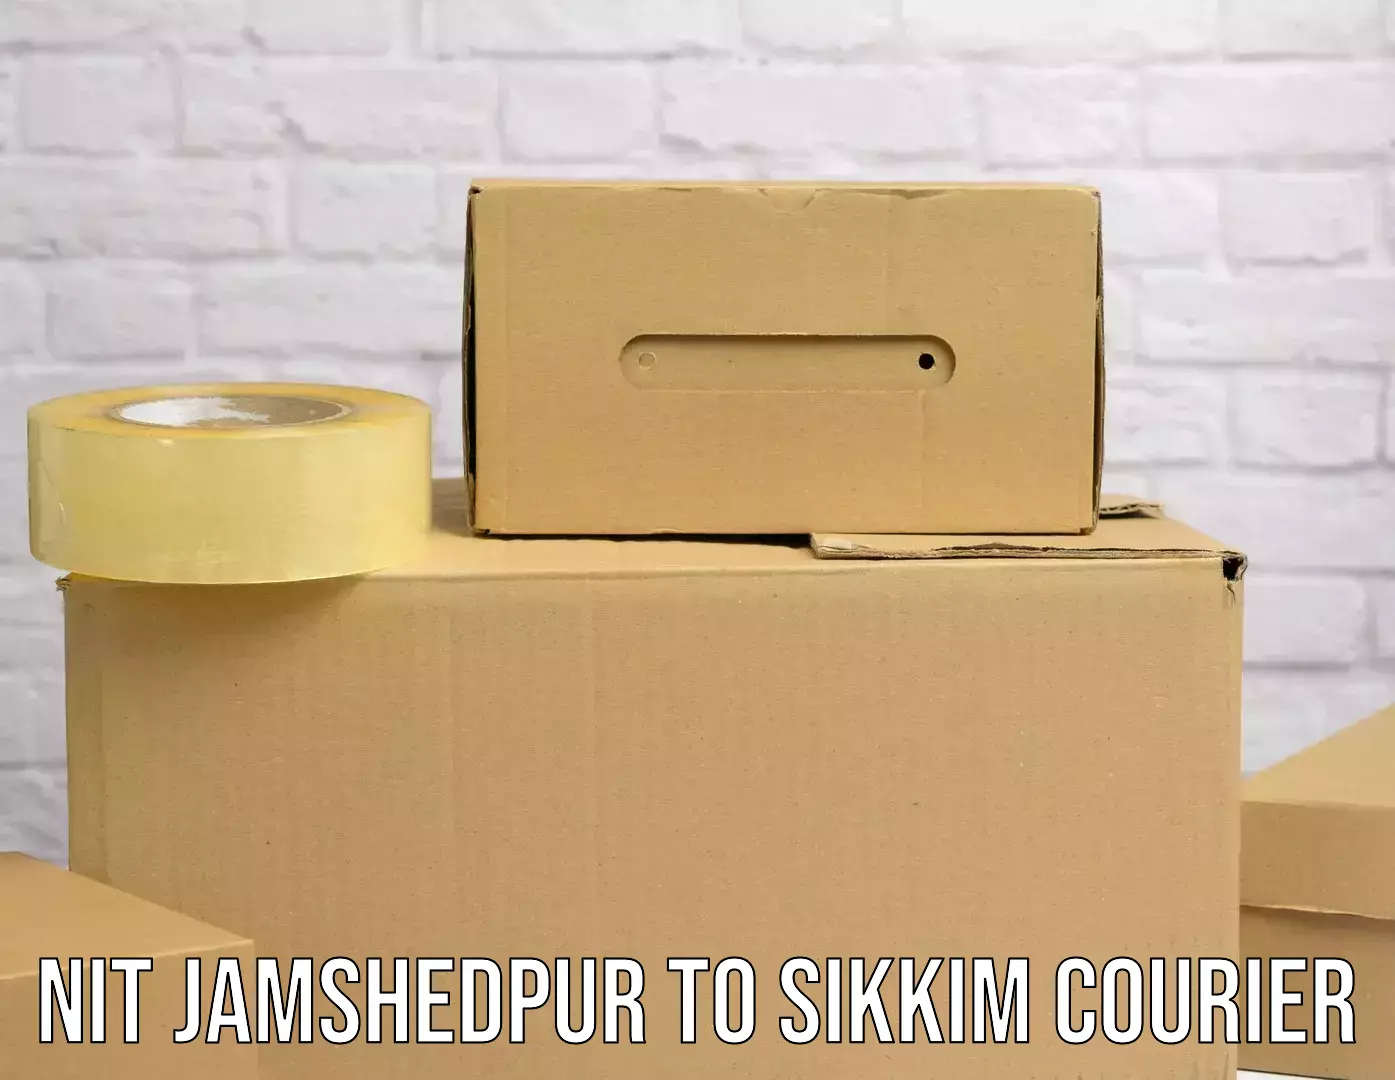 Next-day delivery options NIT Jamshedpur to Sikkim